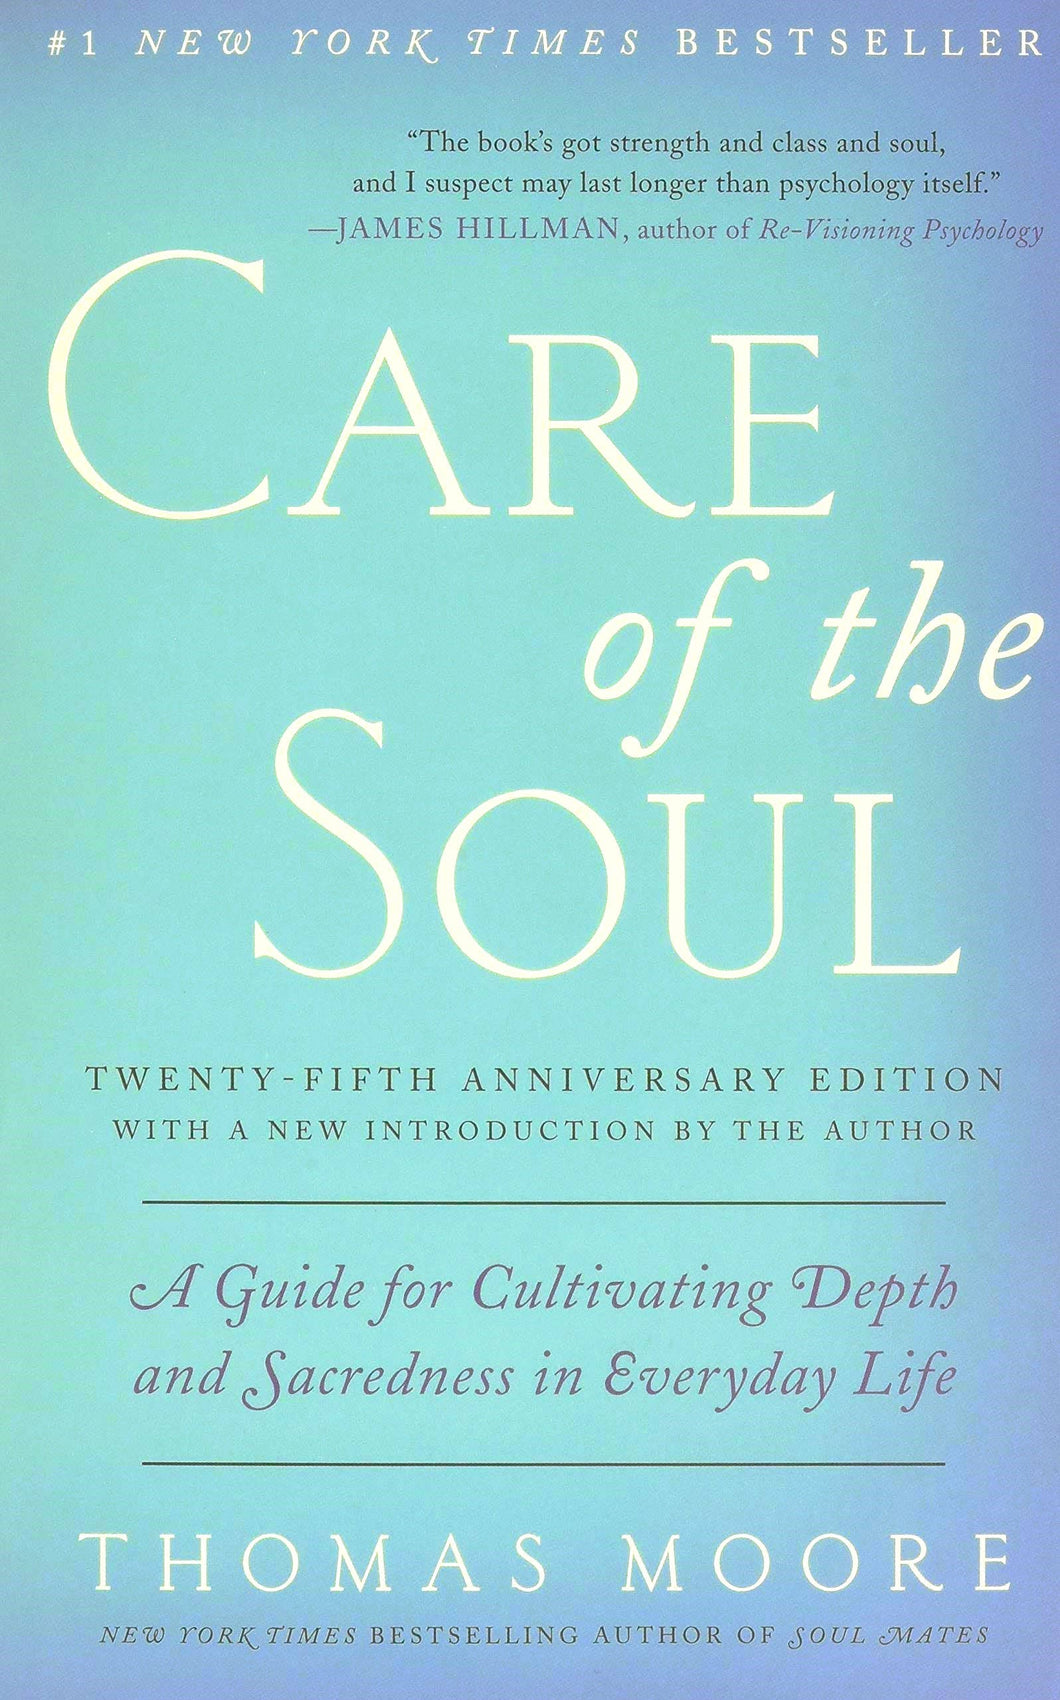 Care of the Soul: A Guide for Cultivating Depth & Sacredness